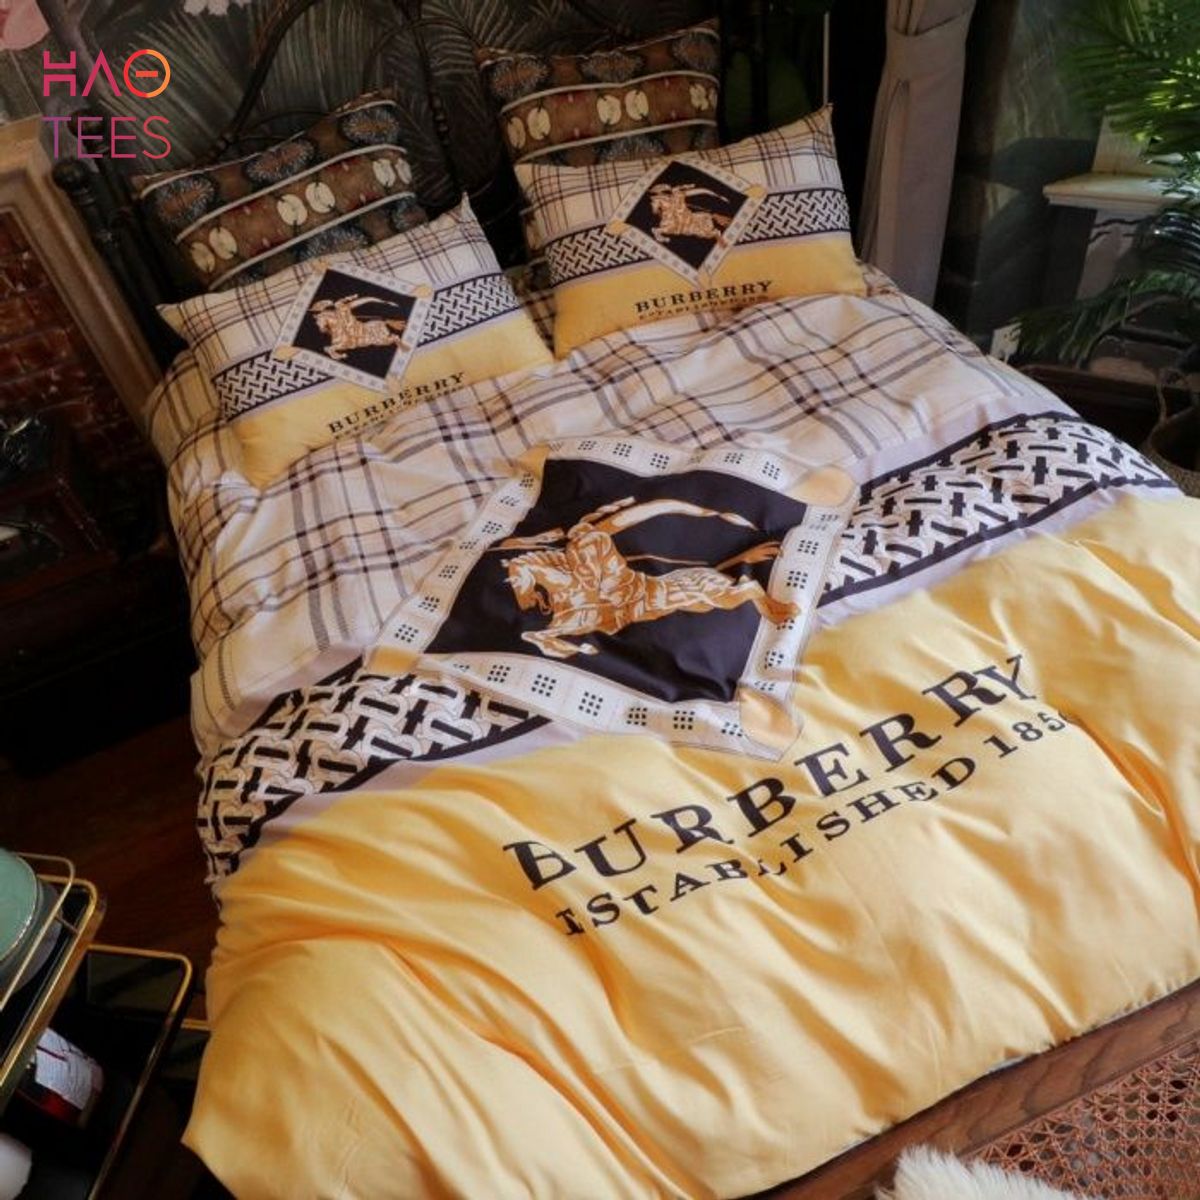 Burberry Mix Gold Luxury Color Duvet Cover Bedding Set Limited Edition